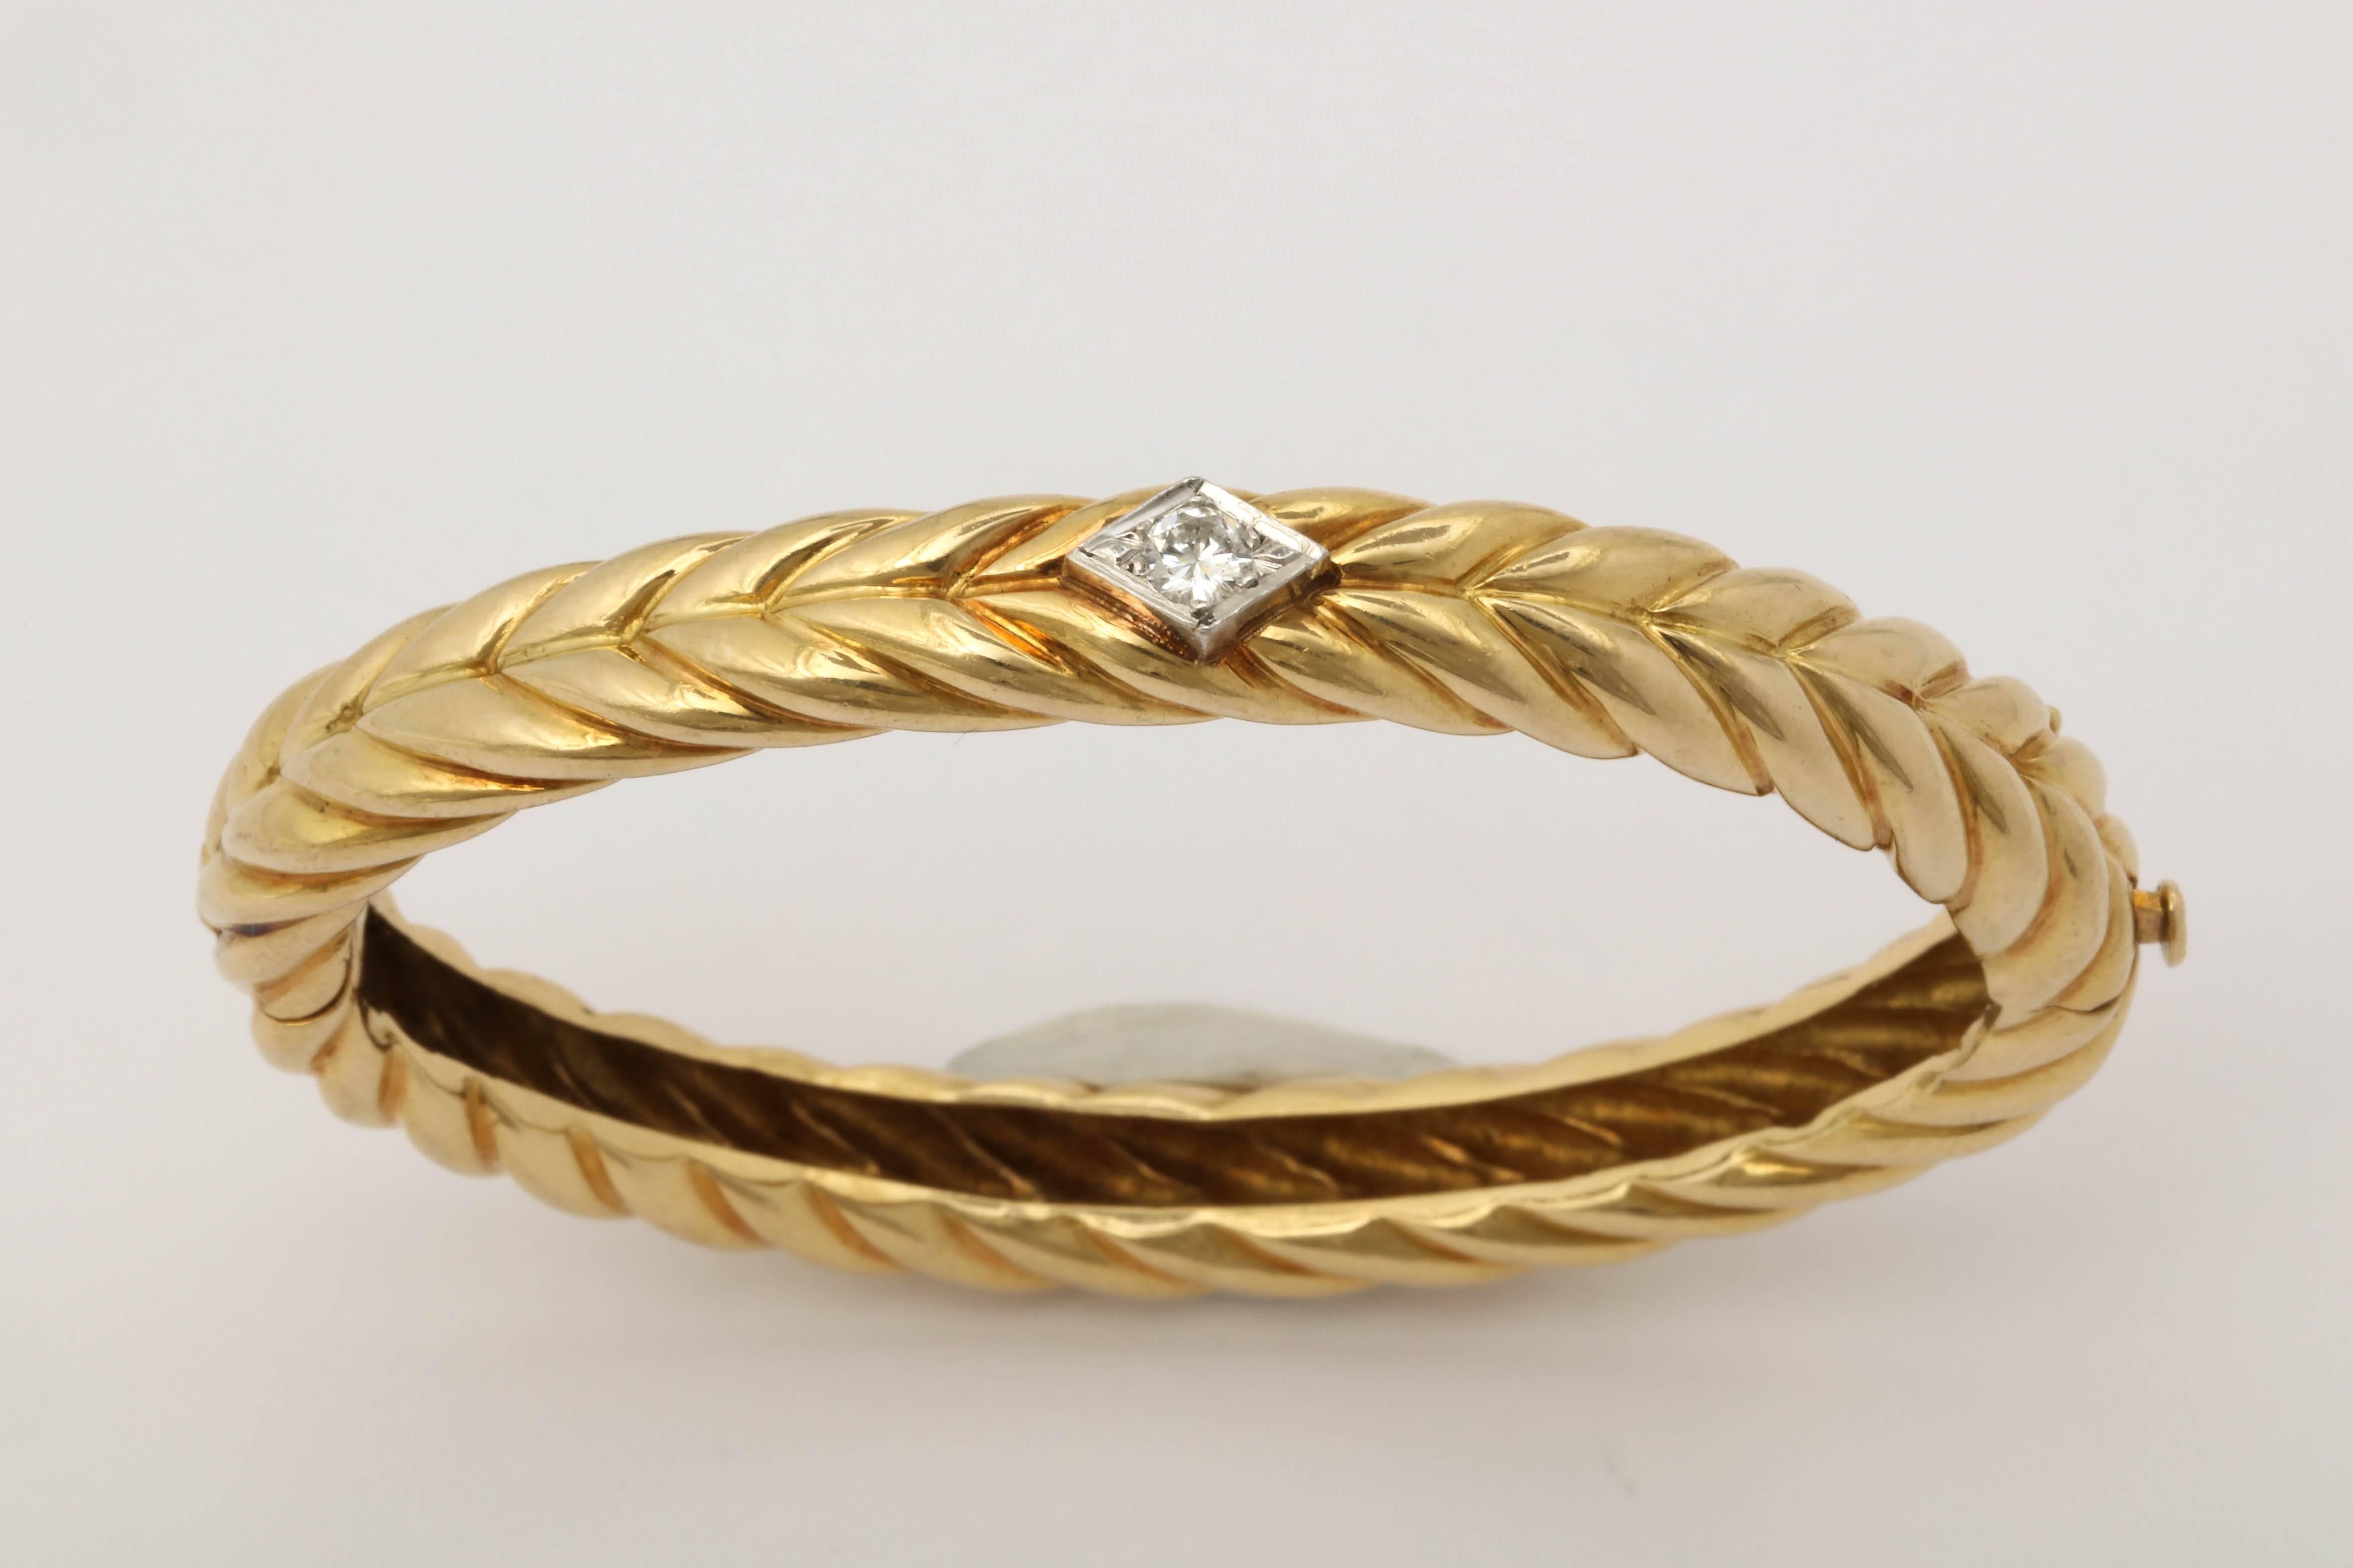 One Ladies 18kt Yellow Gold High Polish Textured Ridged Gold Hinged Oval Shaped Bangle Bracelet. Centering An Approximate .25ct Full Cut Diamond. Bangle Fits An average To Small Size Wrist. Signed And Numbered Cartier, 18kt.Serial # 90032.Attached